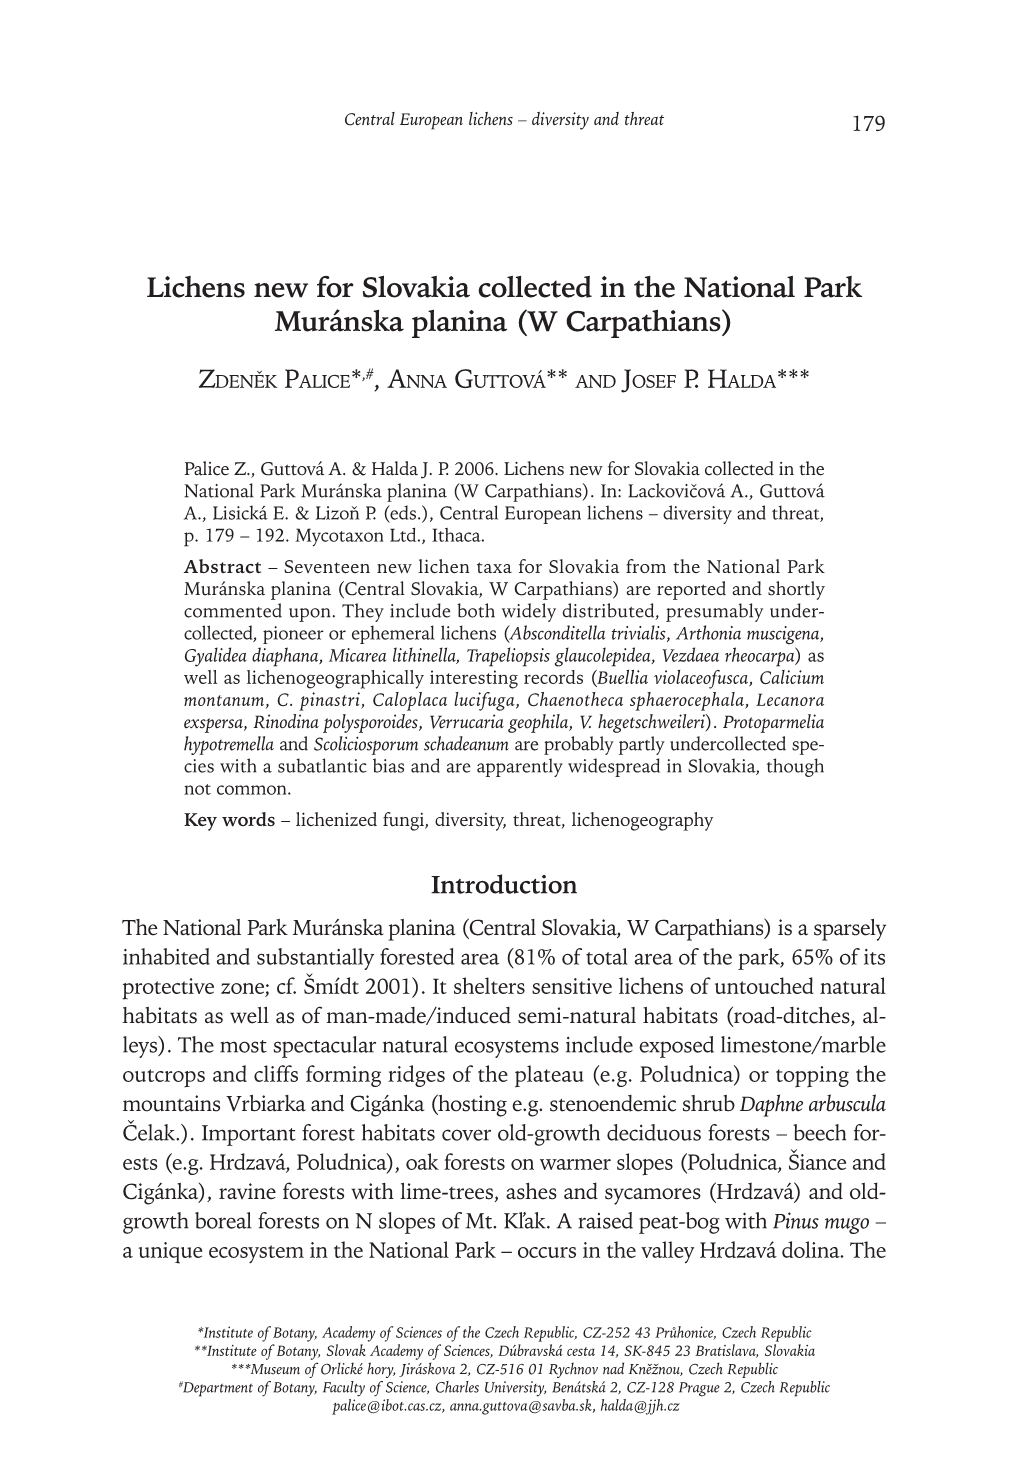 Lichens New for Slovakia Collected in the National Park Muránska Planina (W Carpathians)